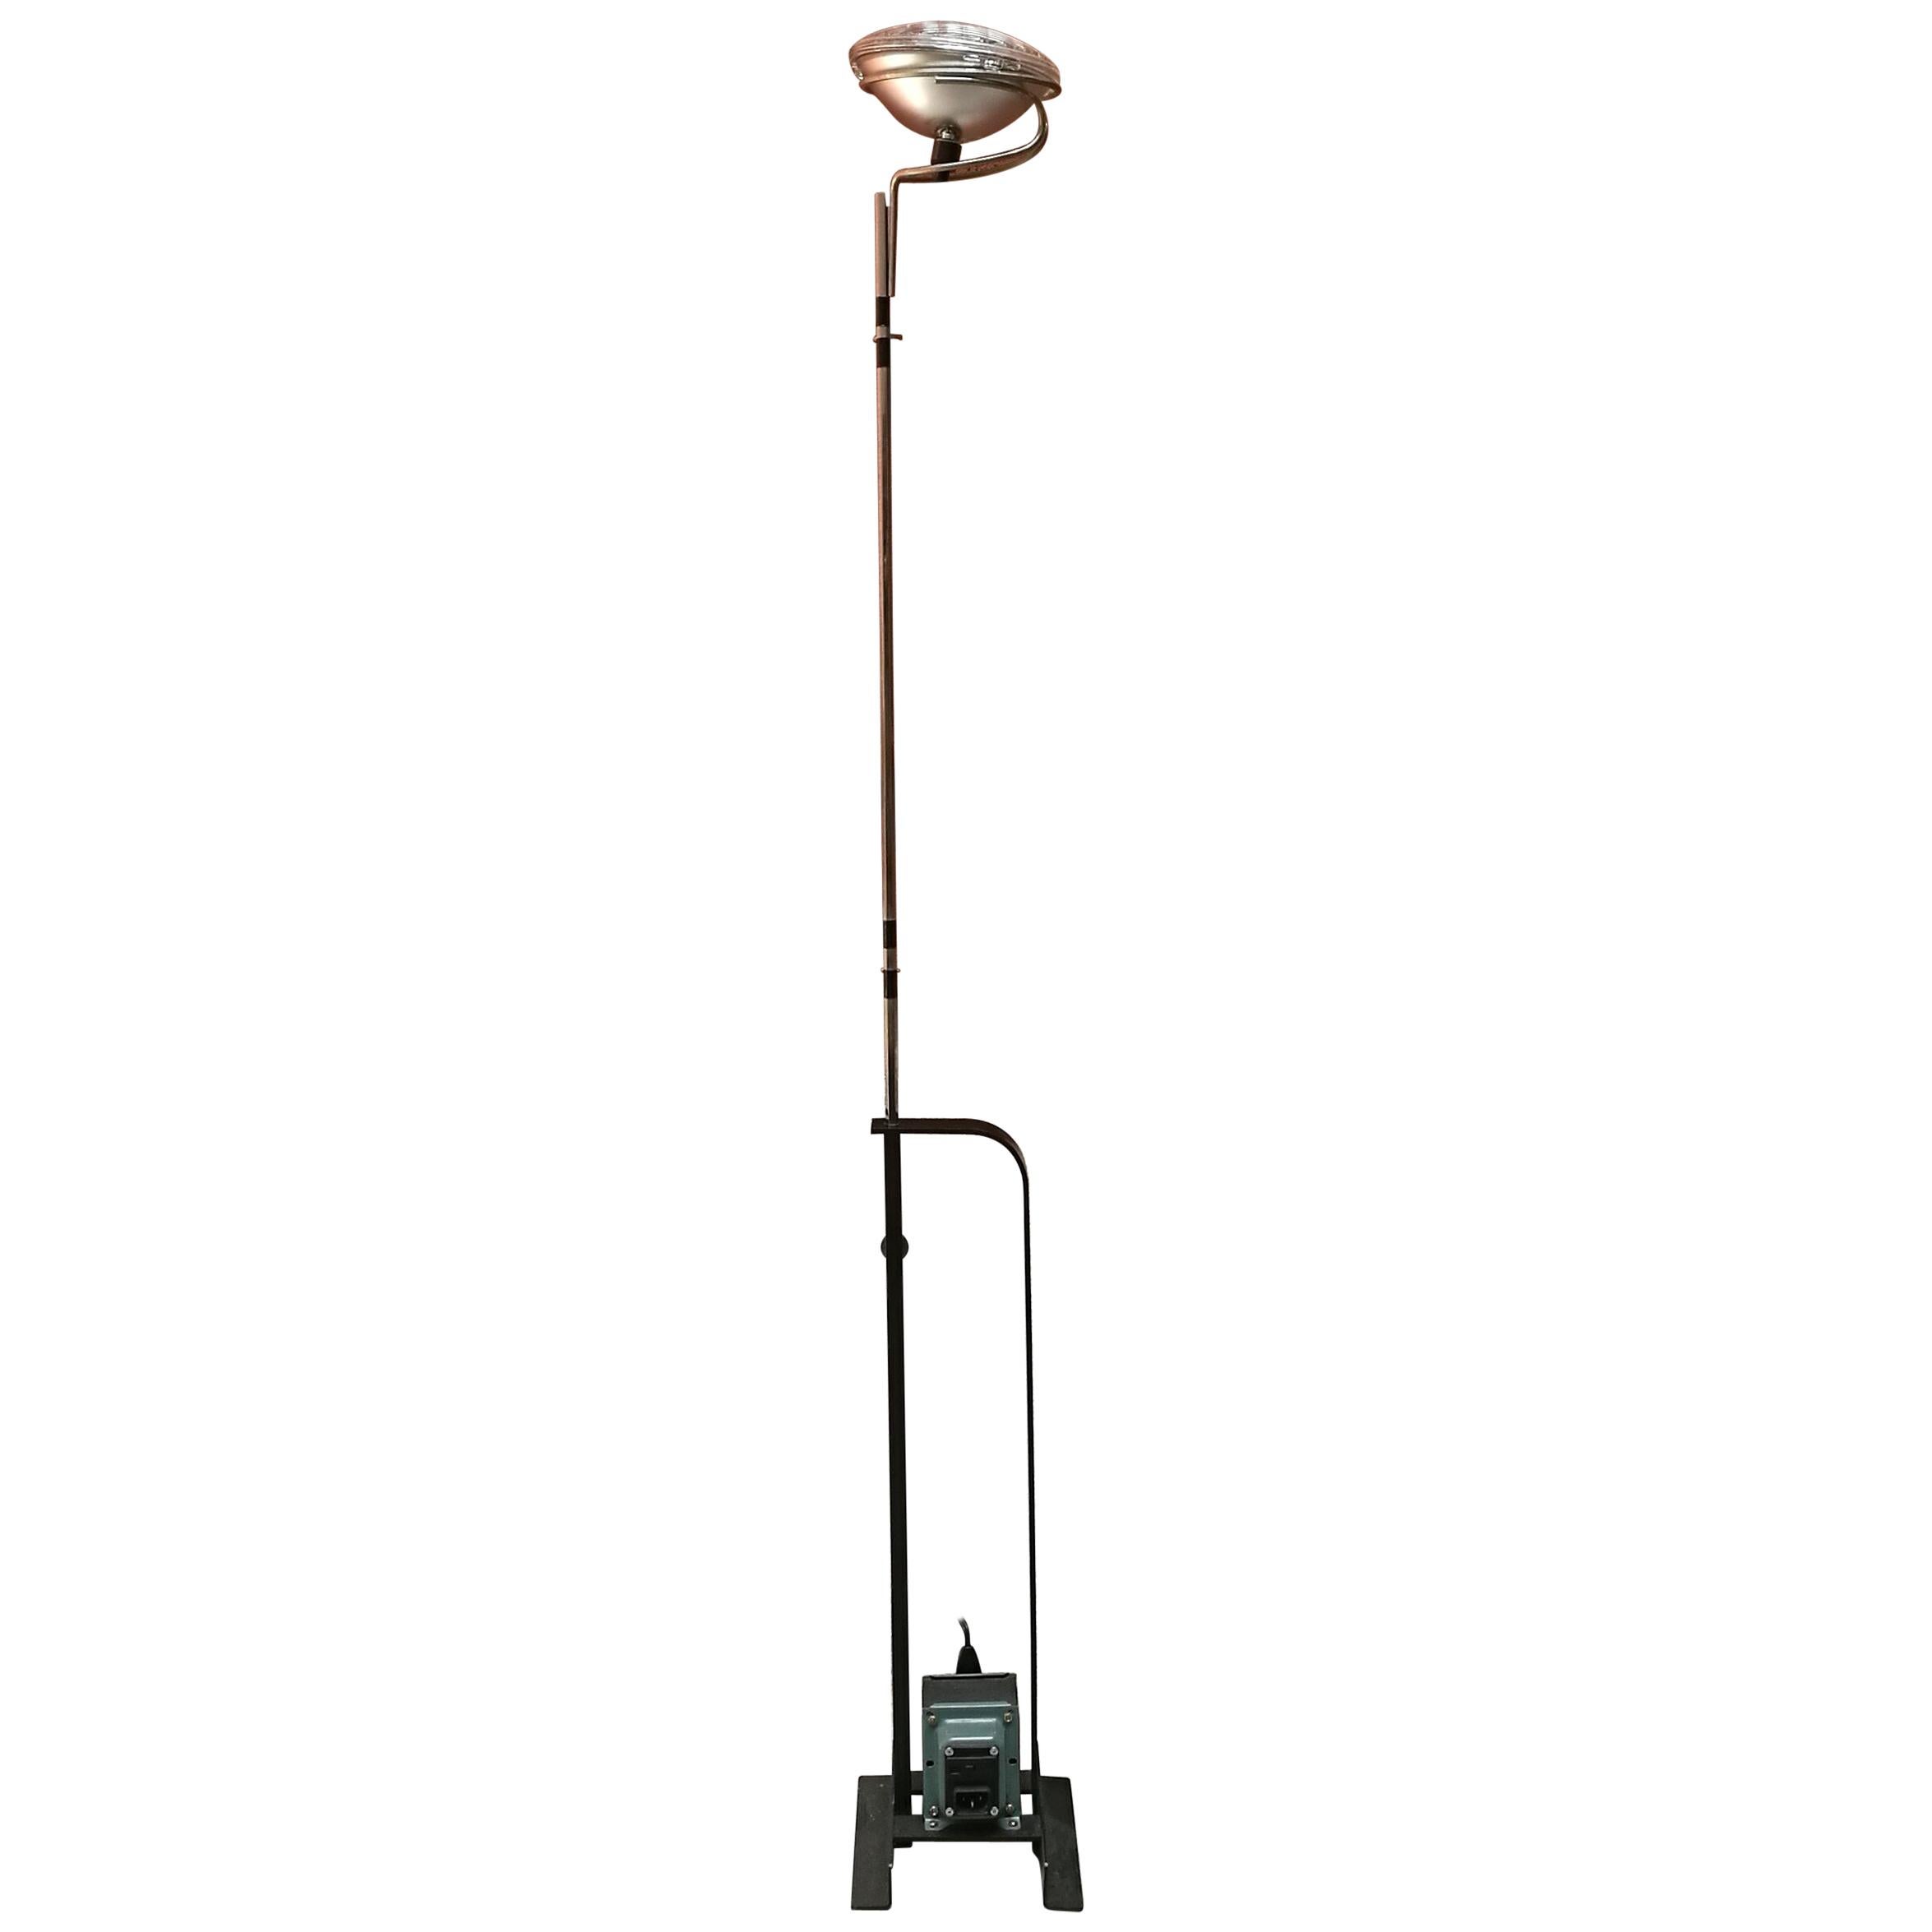 Toio Floor Lamp by Achille and Pier Giacomo Castiglioni for Flos, 1962